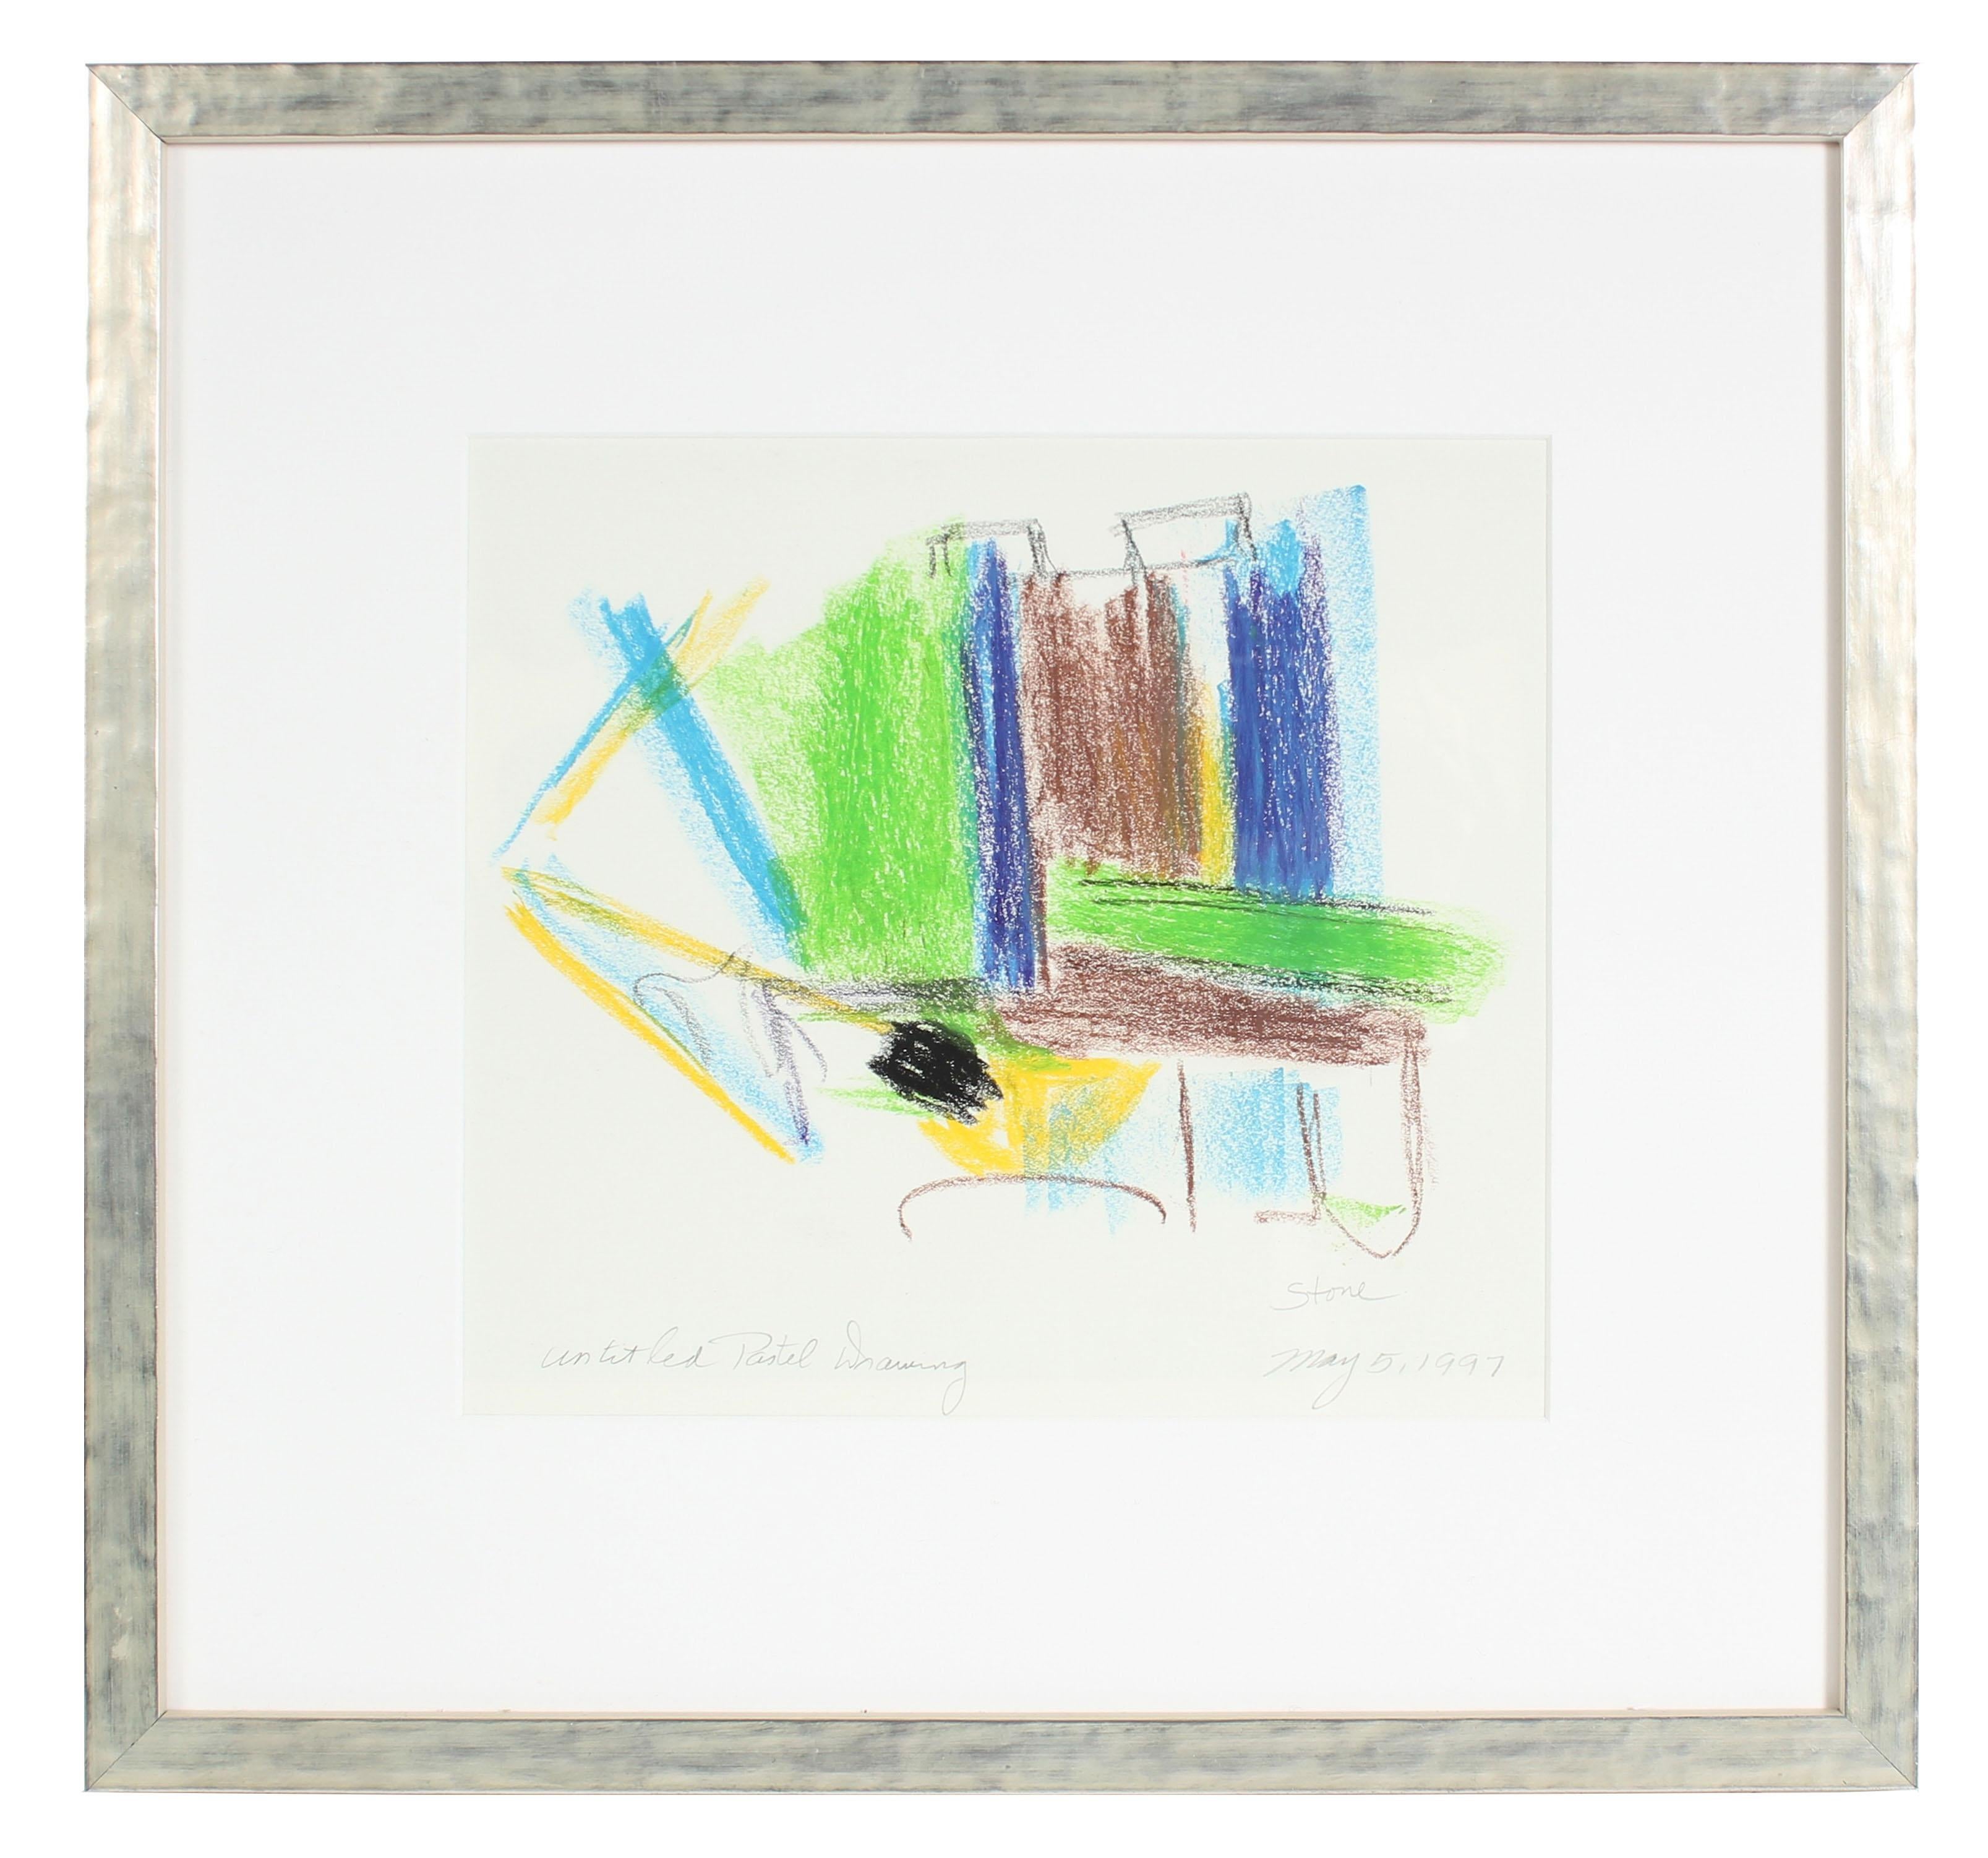 Gwen Stone Abstract Drawing - "Untitled Pastel on Paper", 1997, Angular Abstract in Green, Yellow, Brown, Blue